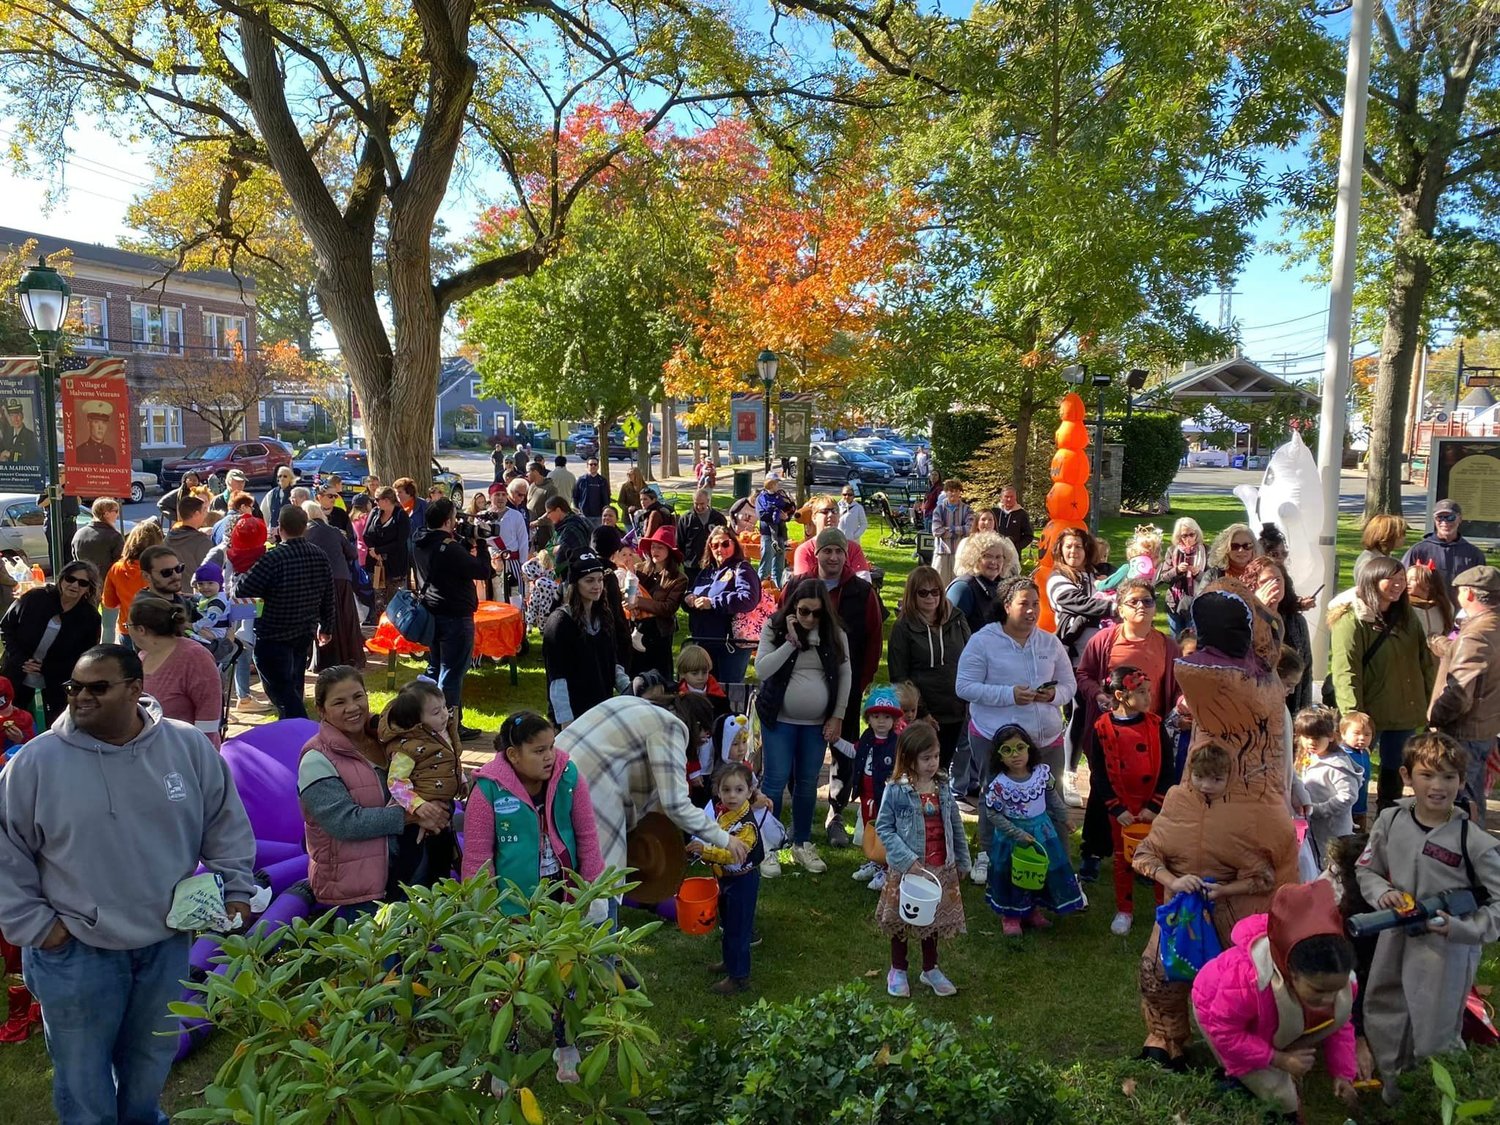 Hundreds of costumed children and their families gathered at Reese park on Oct. 29 to celebrate Halloween.